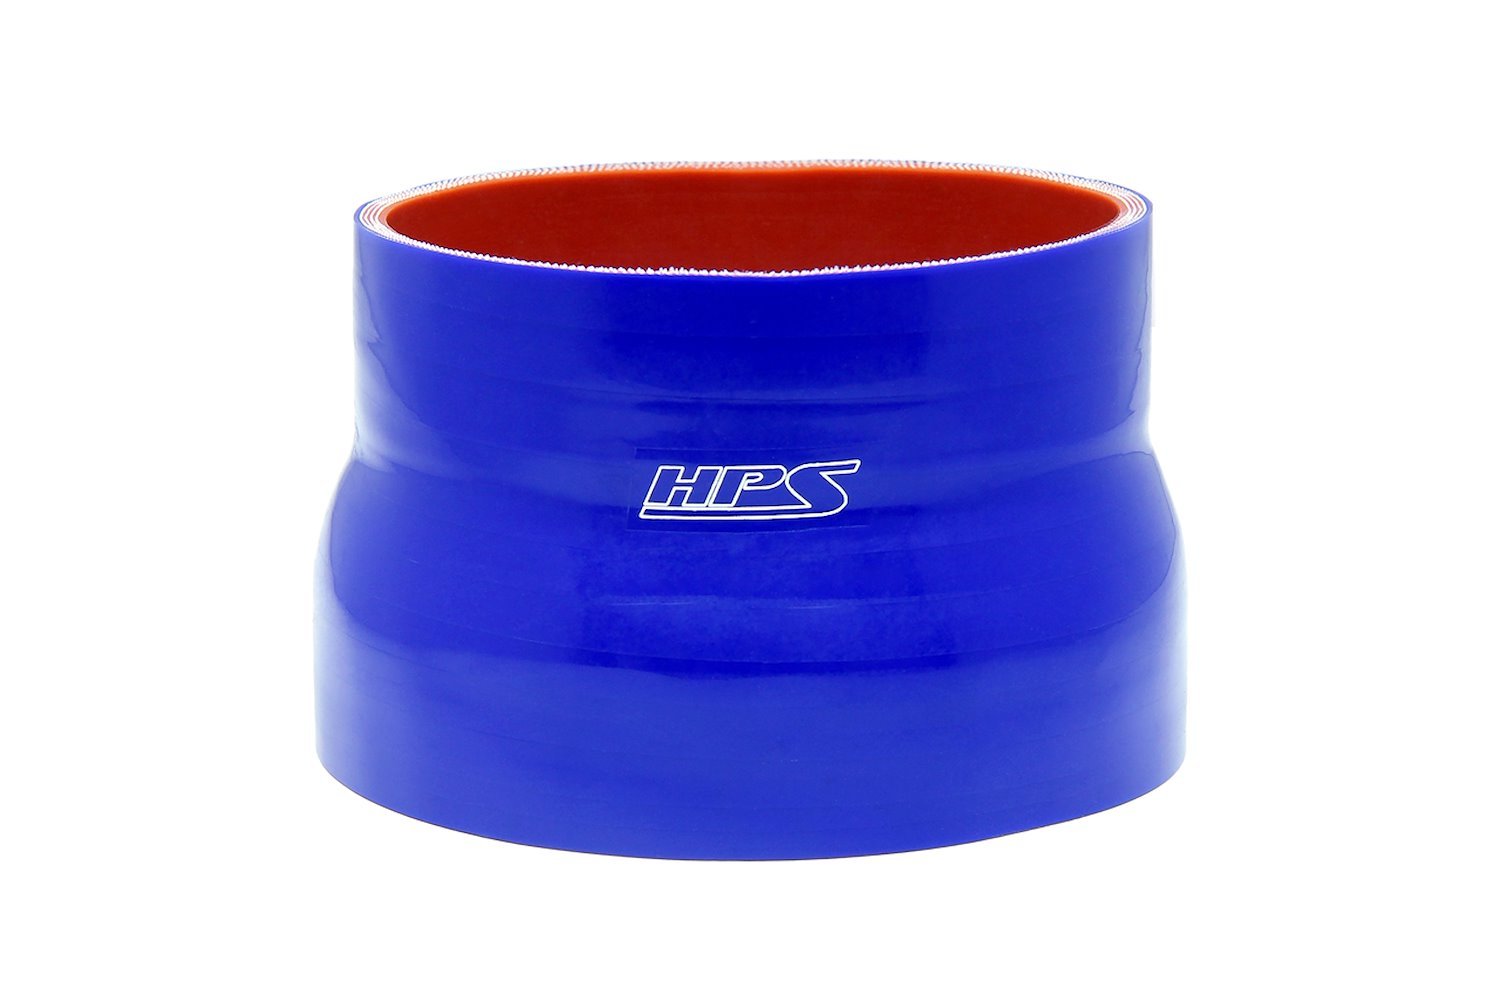 HTSR-350-450-L4-BLUE Silicone Reducer Hose, High-Temp 4-Ply Reinforced, 3-1/2 in. - 4-1/2 in. ID, 4 in. Long, Blue